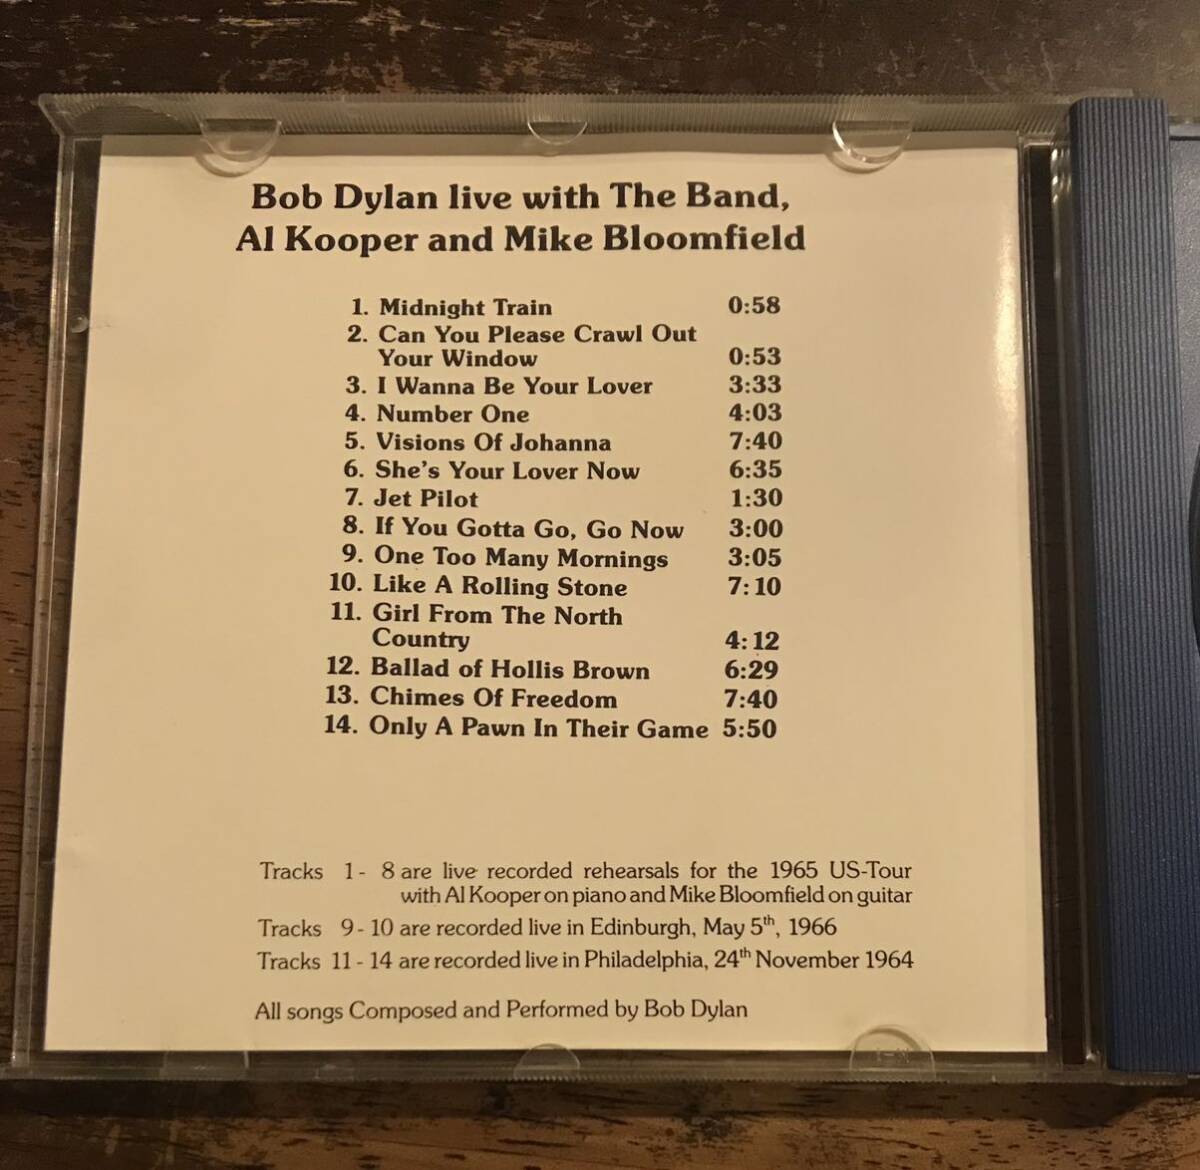 Bob Dylan / Live with The Band, Al Kooper and Mike Bloomfield / 1CD / pressed CD / Studio Outtakes, Sessions Rare Live Tracks / ボ_画像3